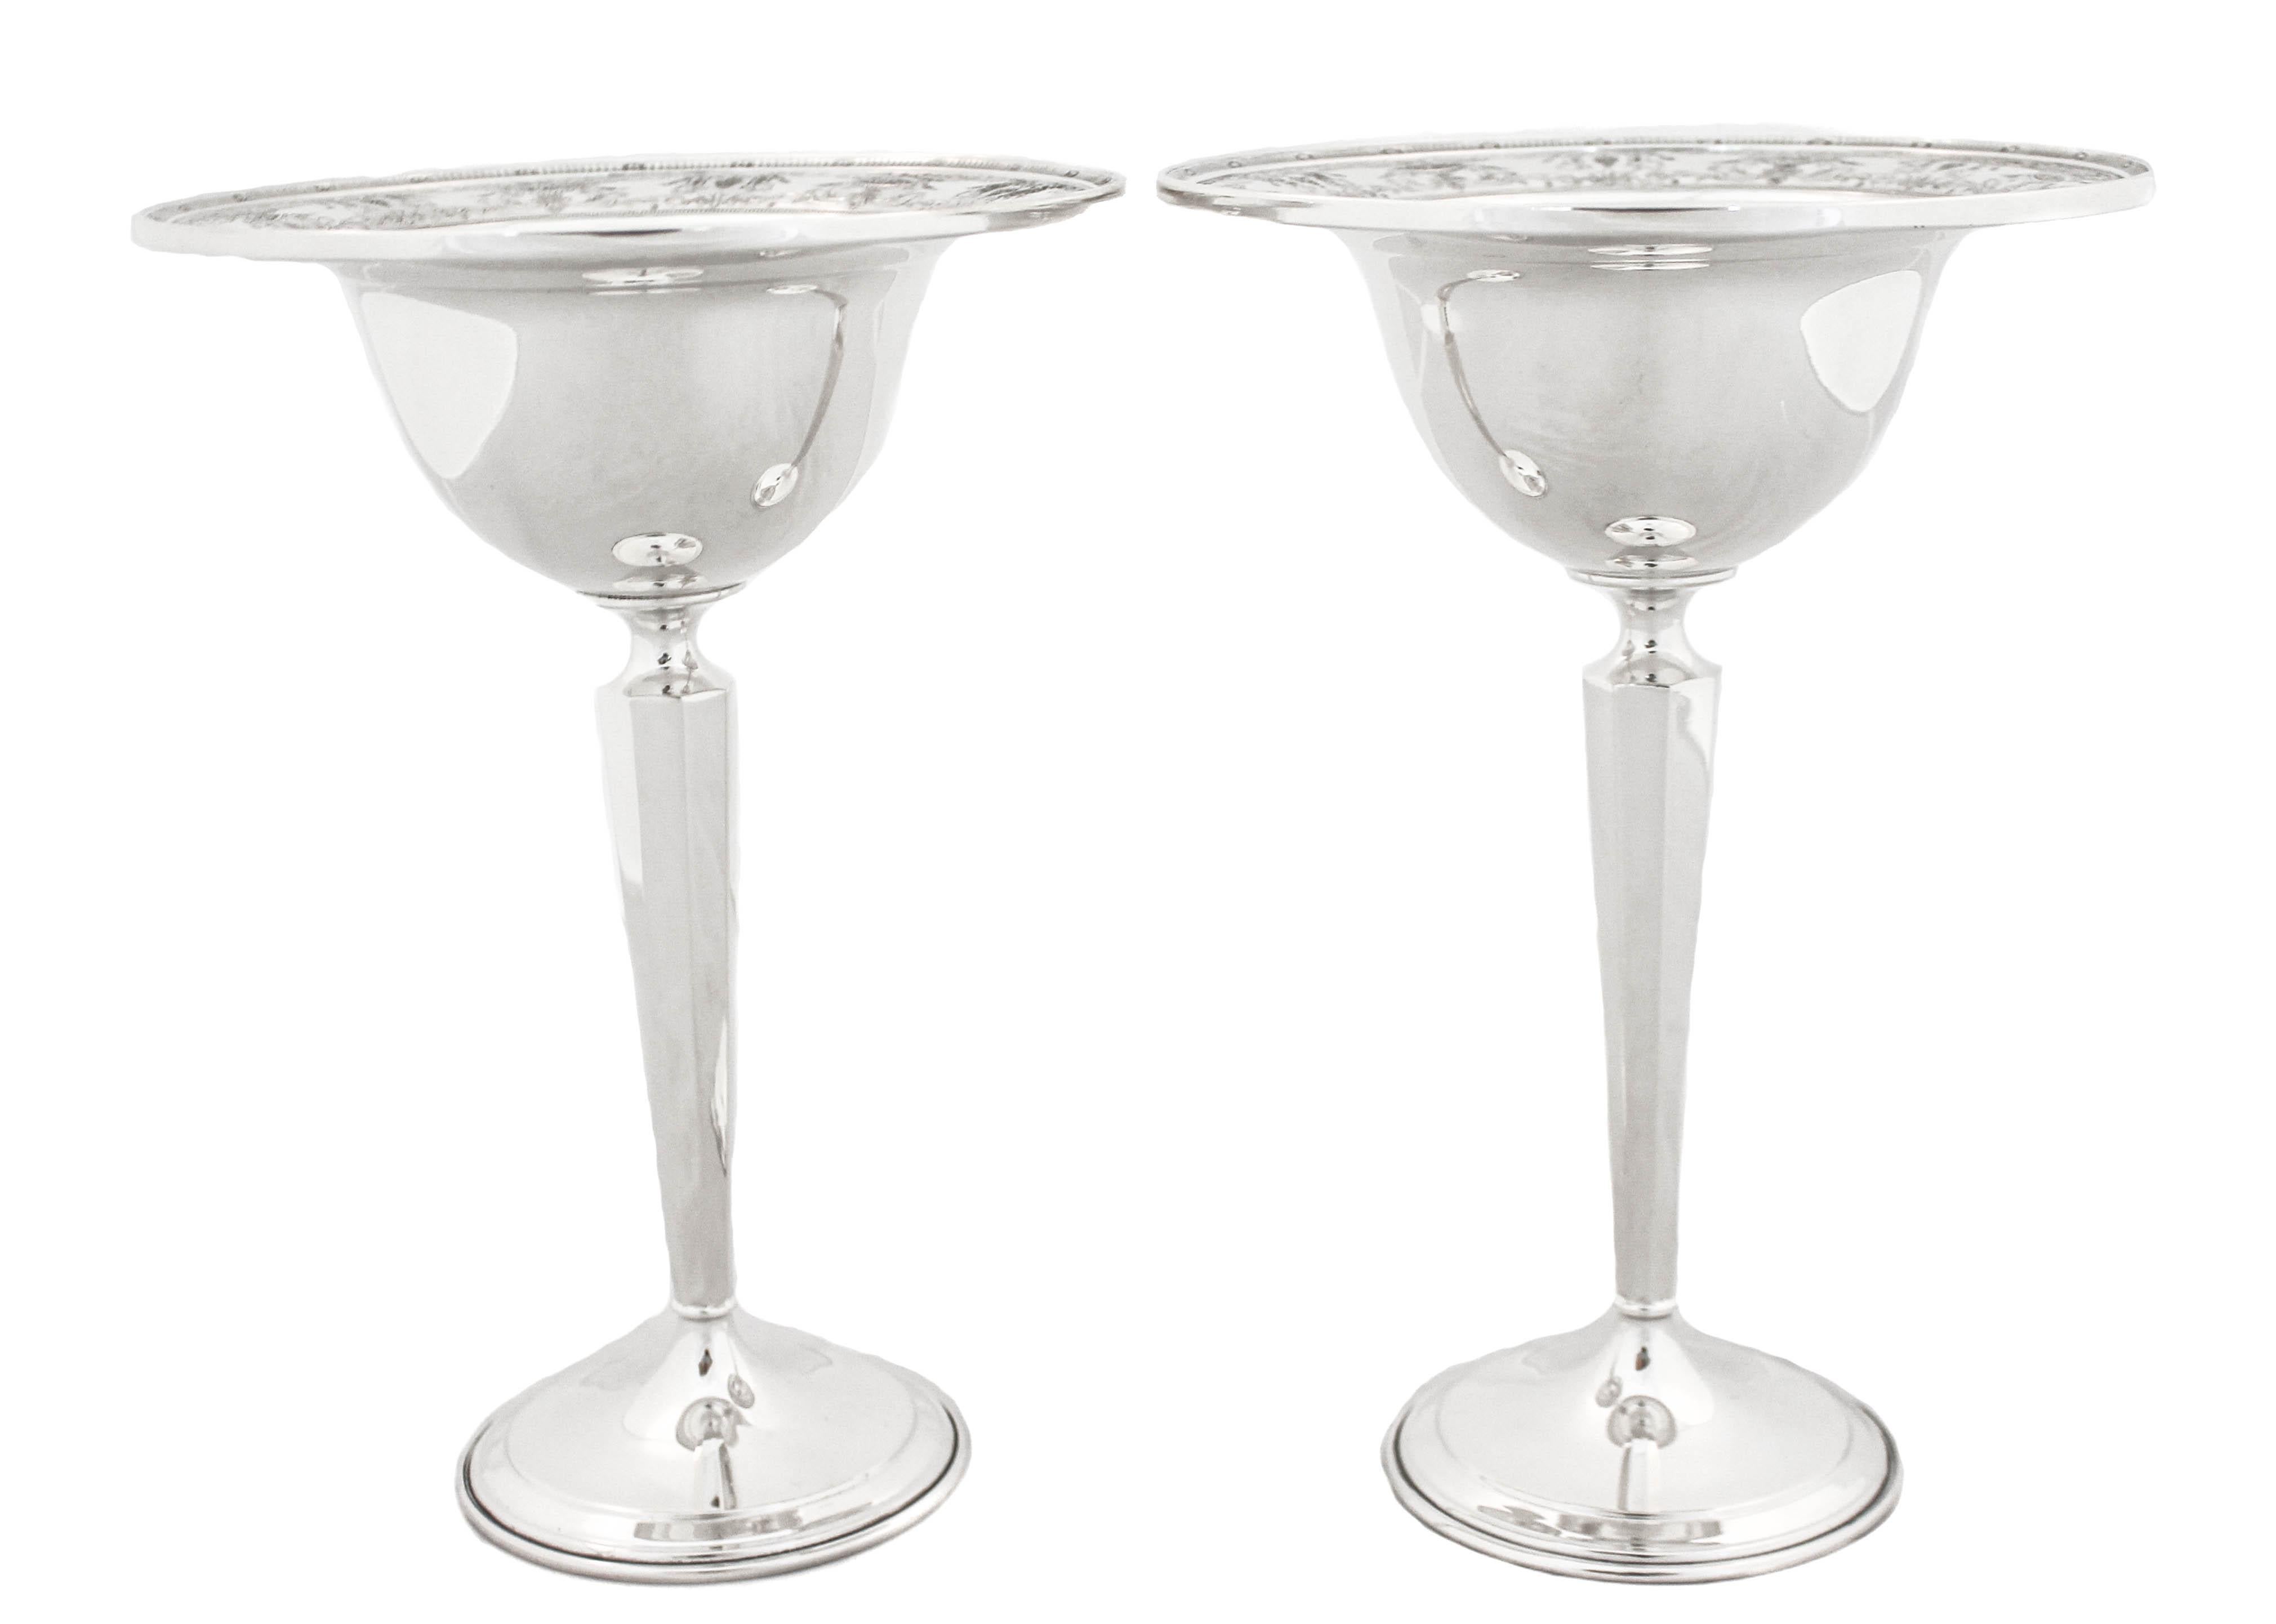 Proudly offering this pair of sterling silver compotes by International Silver in the “Maintenon” pattern from 1933.  They are exceptionally tall and the compote portion is deep thereby able to hold a substantial amount.  Around the edge there's a